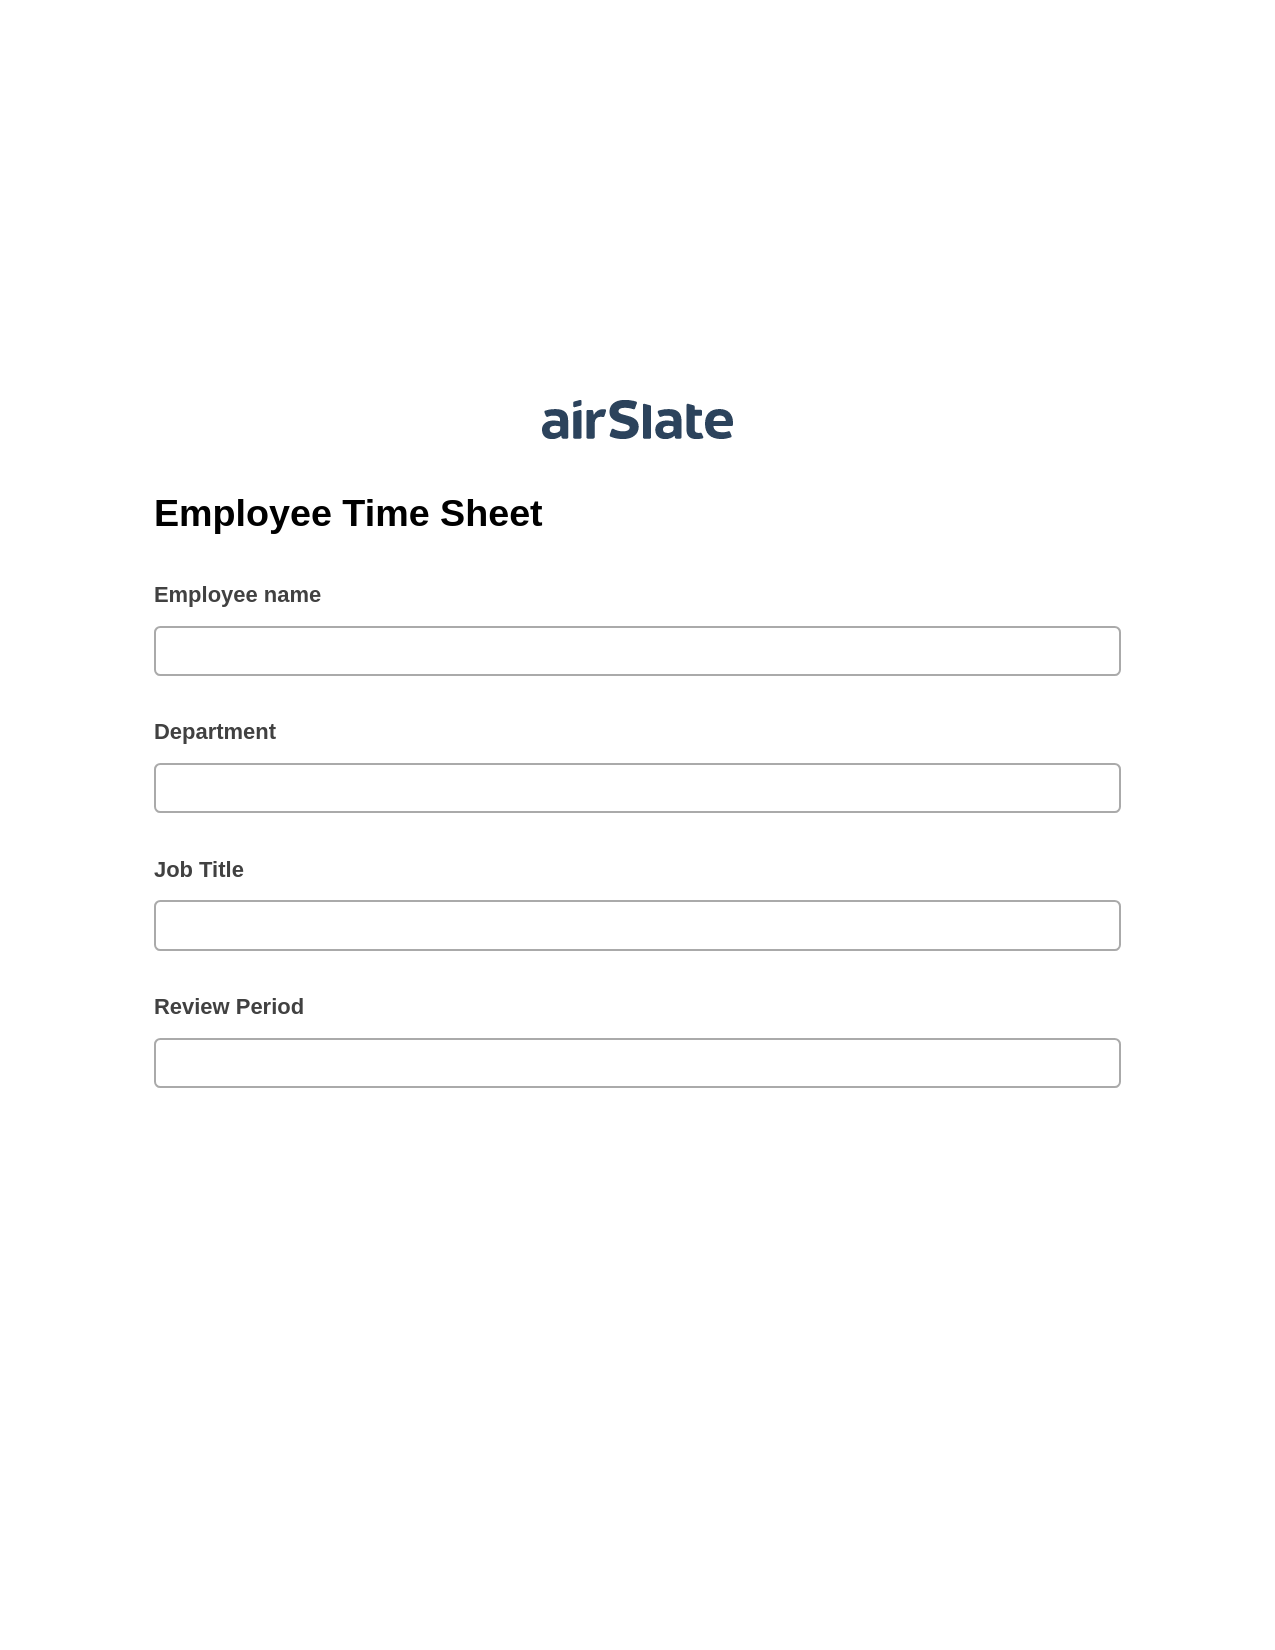 Employee Time Sheet Pre-fill Document Bot, Assign Roles to Recipients Bot, Archive to Dropbox Bot